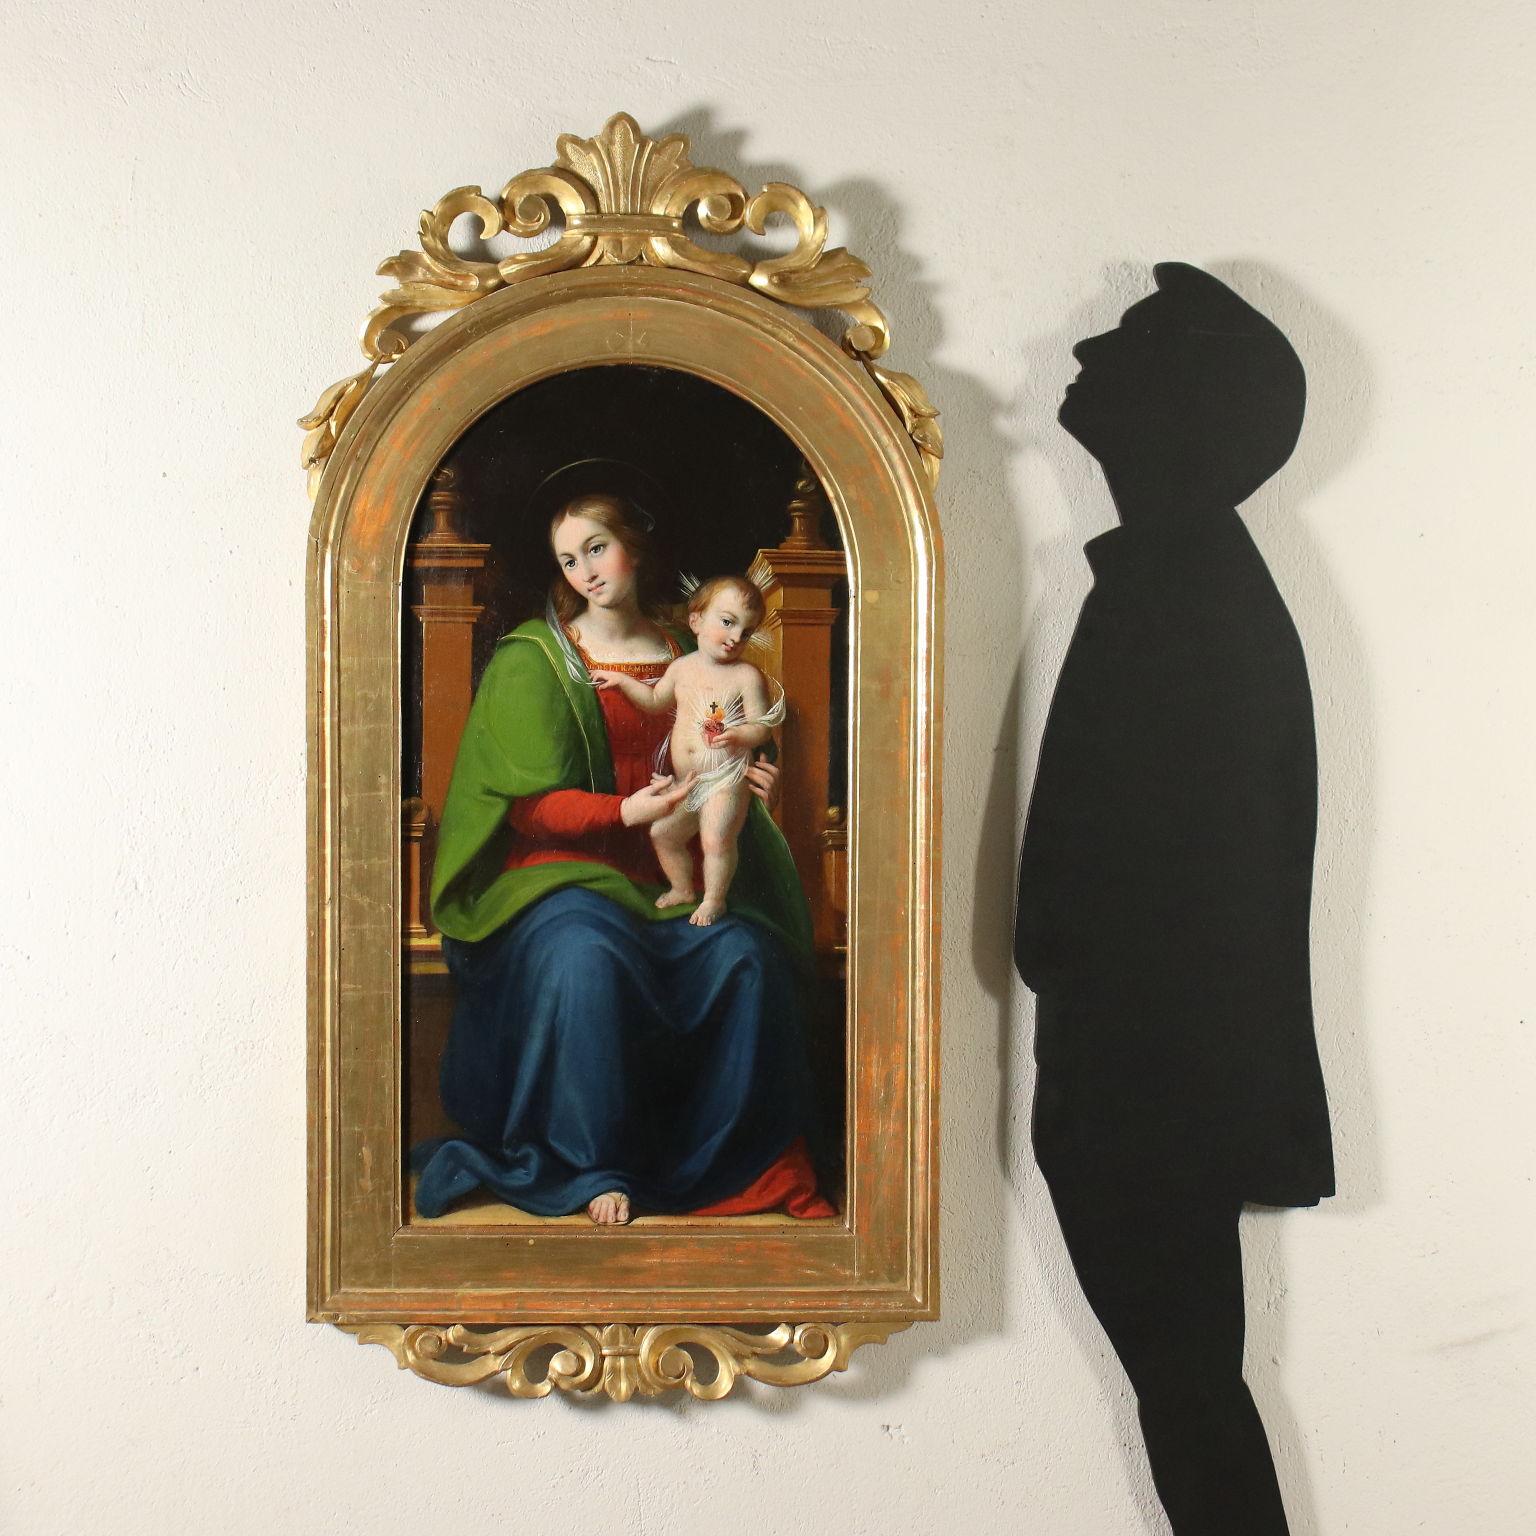 Virgin Mary with child - Painting by Giovanni Beltrami